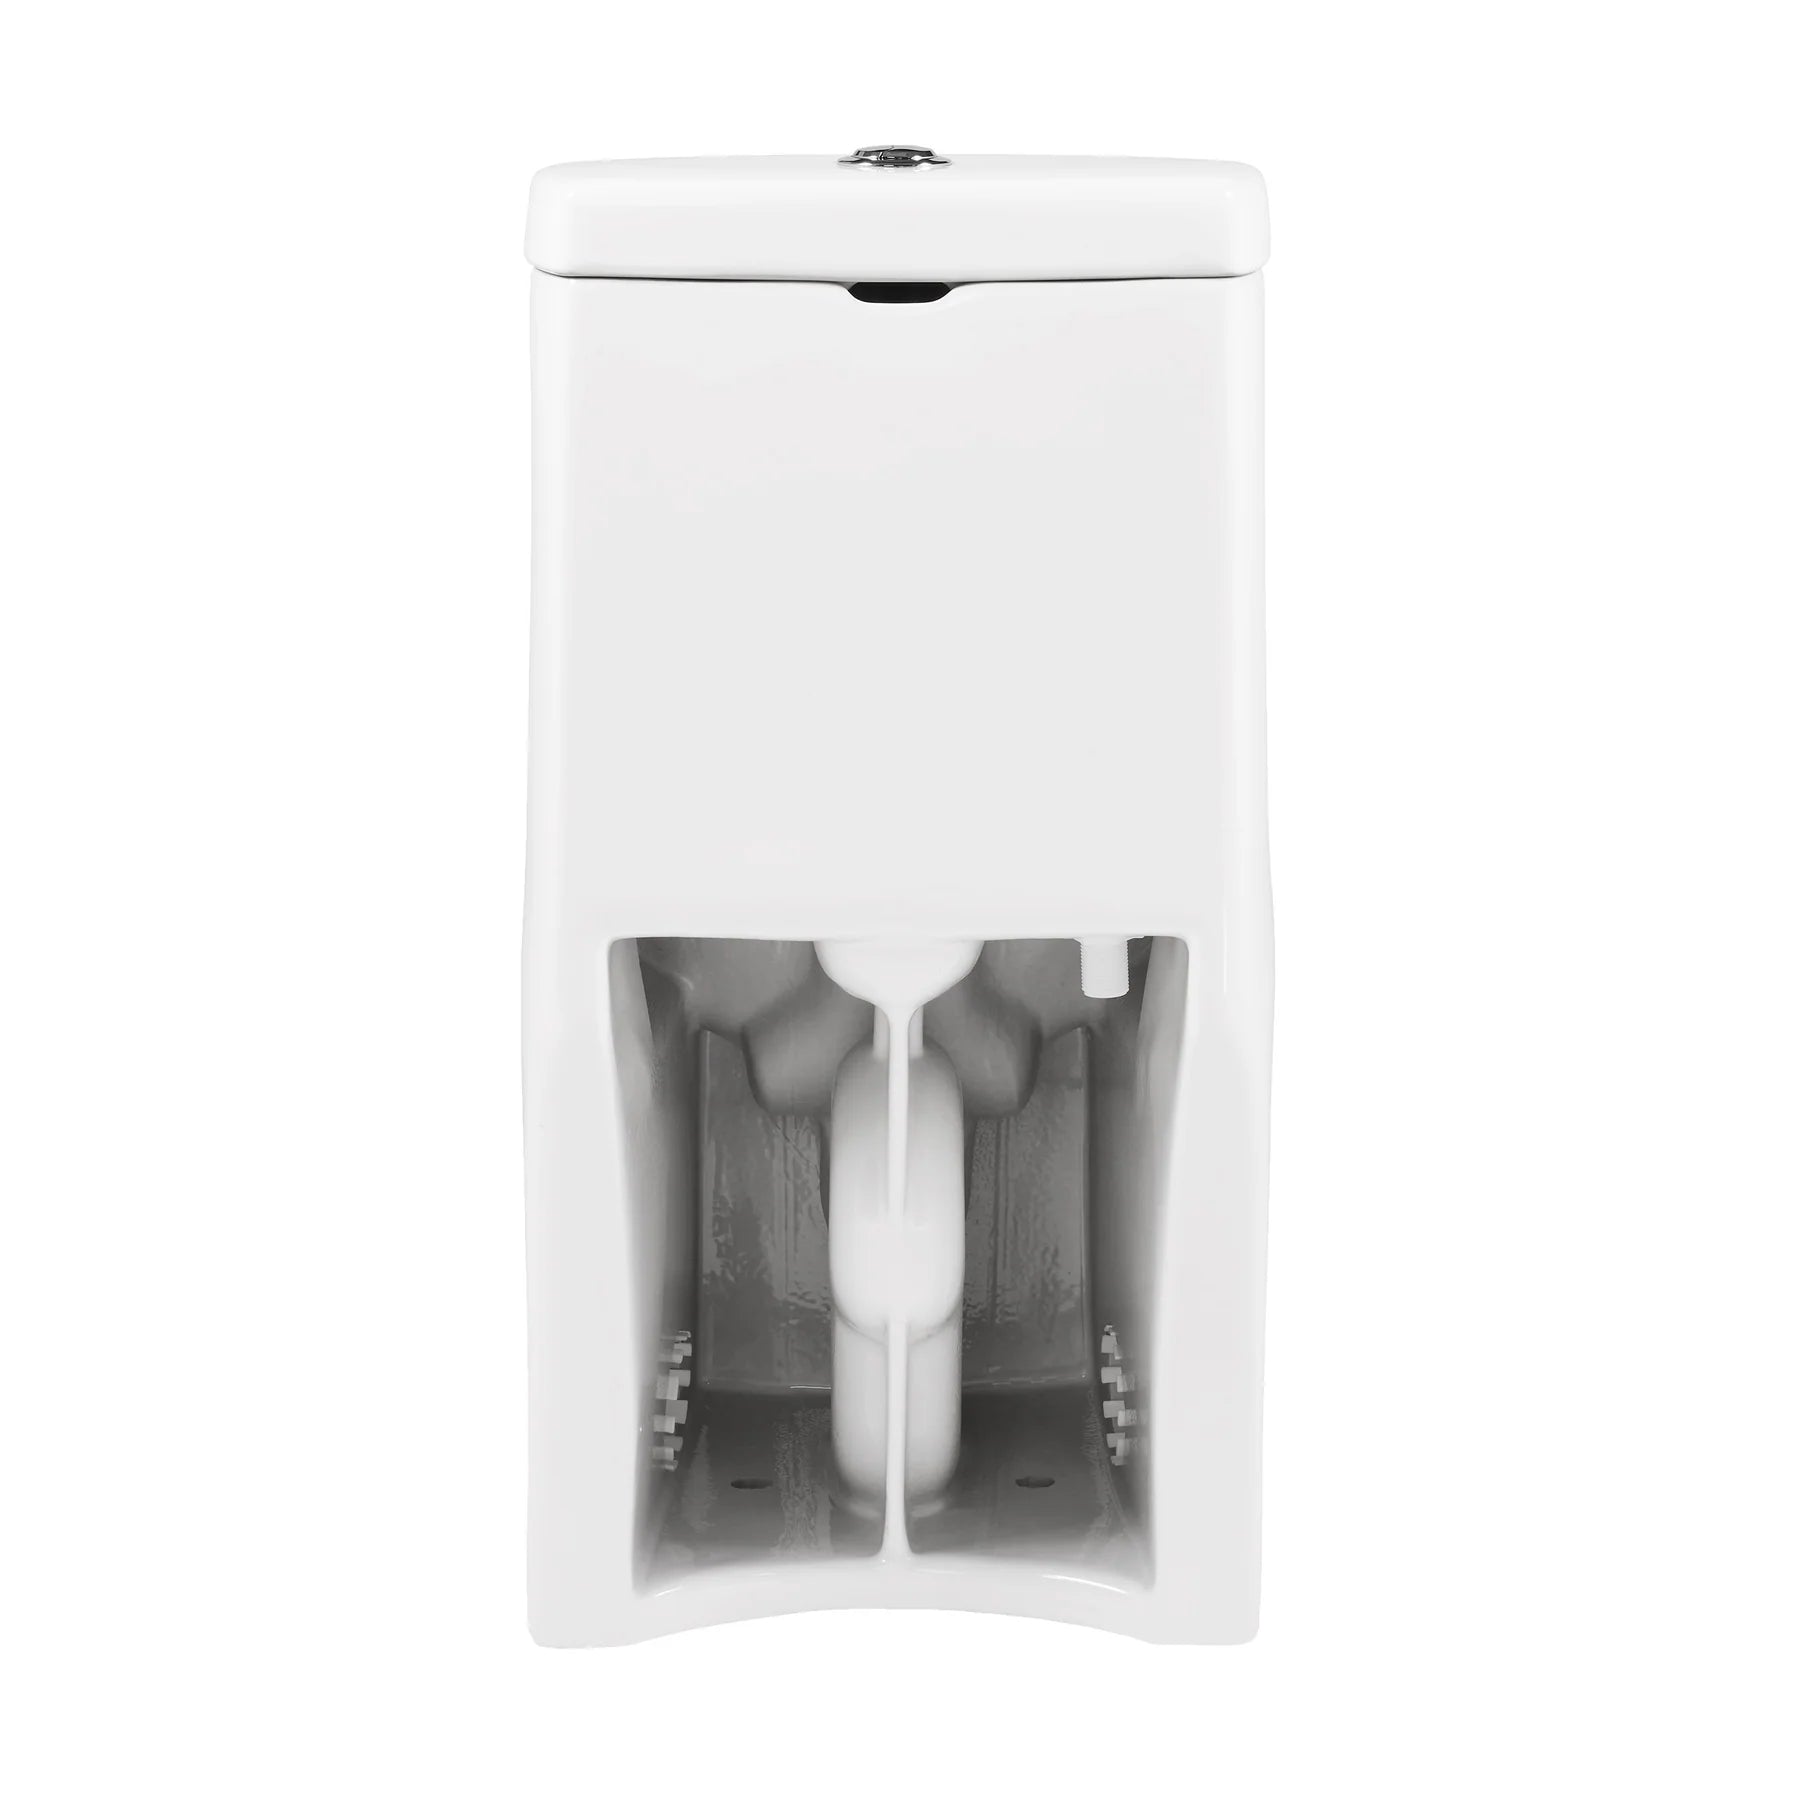 Swiss Madison Monaco One-Piece Elongated Toilet Dual Flush 1.1/1.6 gpf with 10" Rough in - SM-1T280